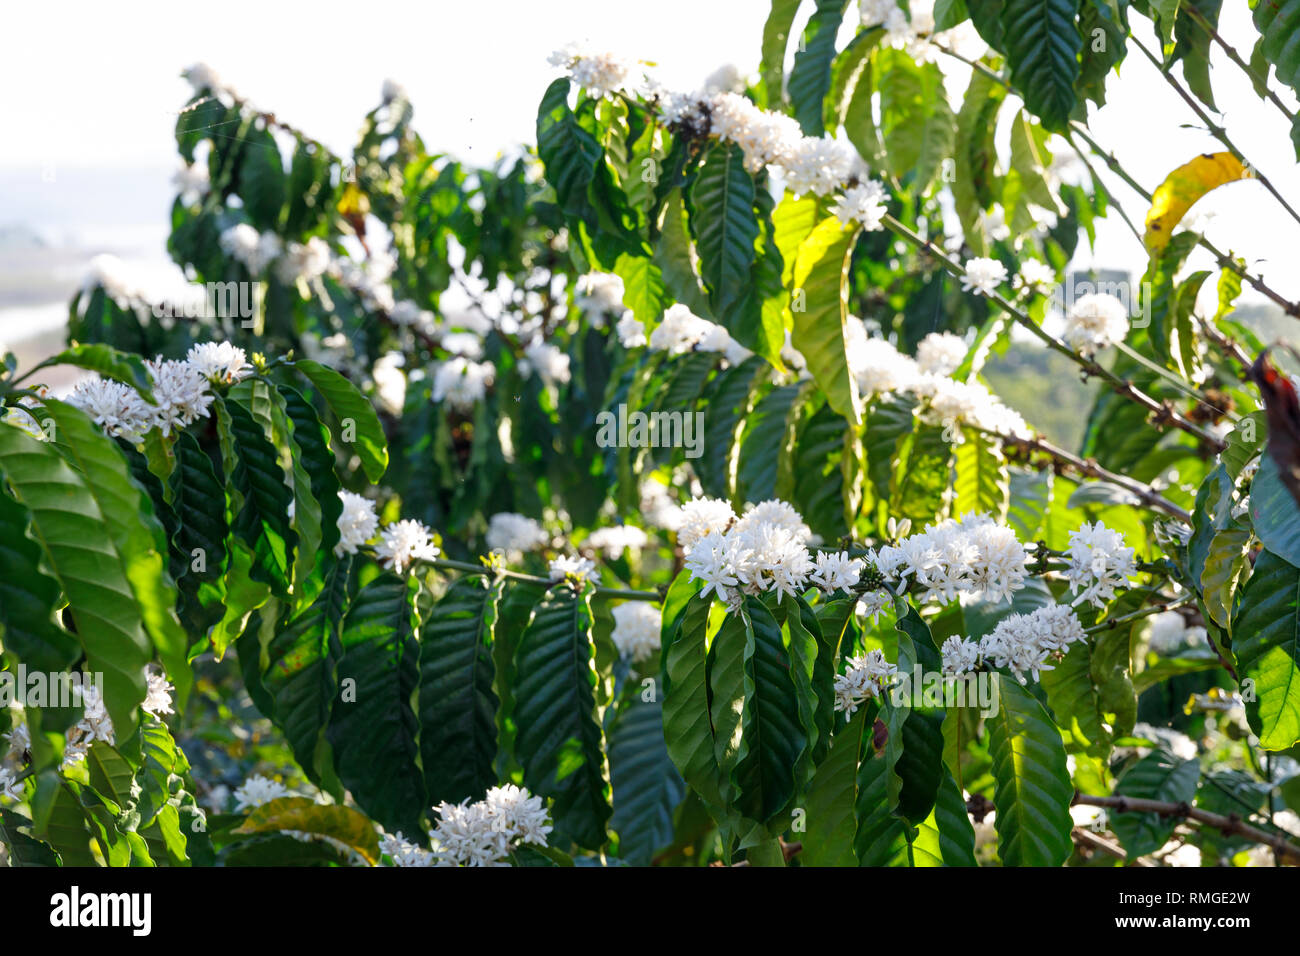 Closeup of green coffee plant leaves, blossoms and berries in Vietnam Stock Photo